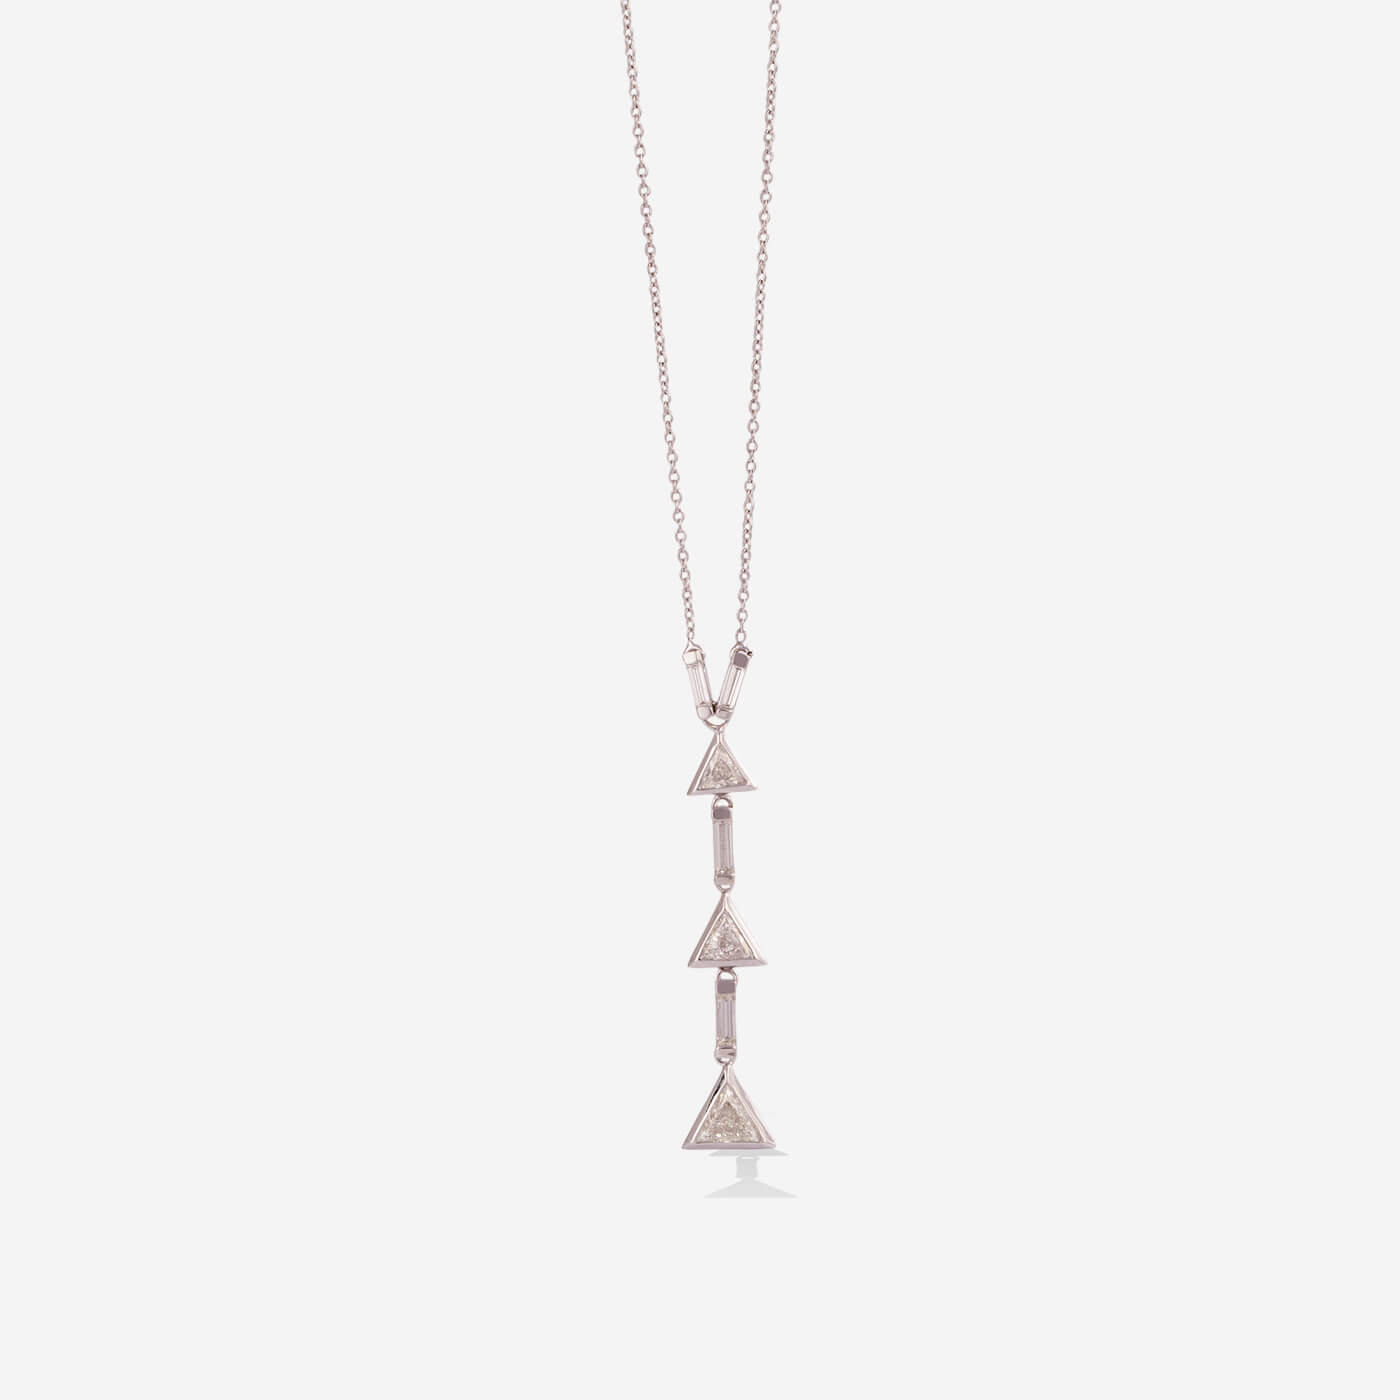 White Gold 3 Arrows With Diamonds Necklace - Ref: RG03099